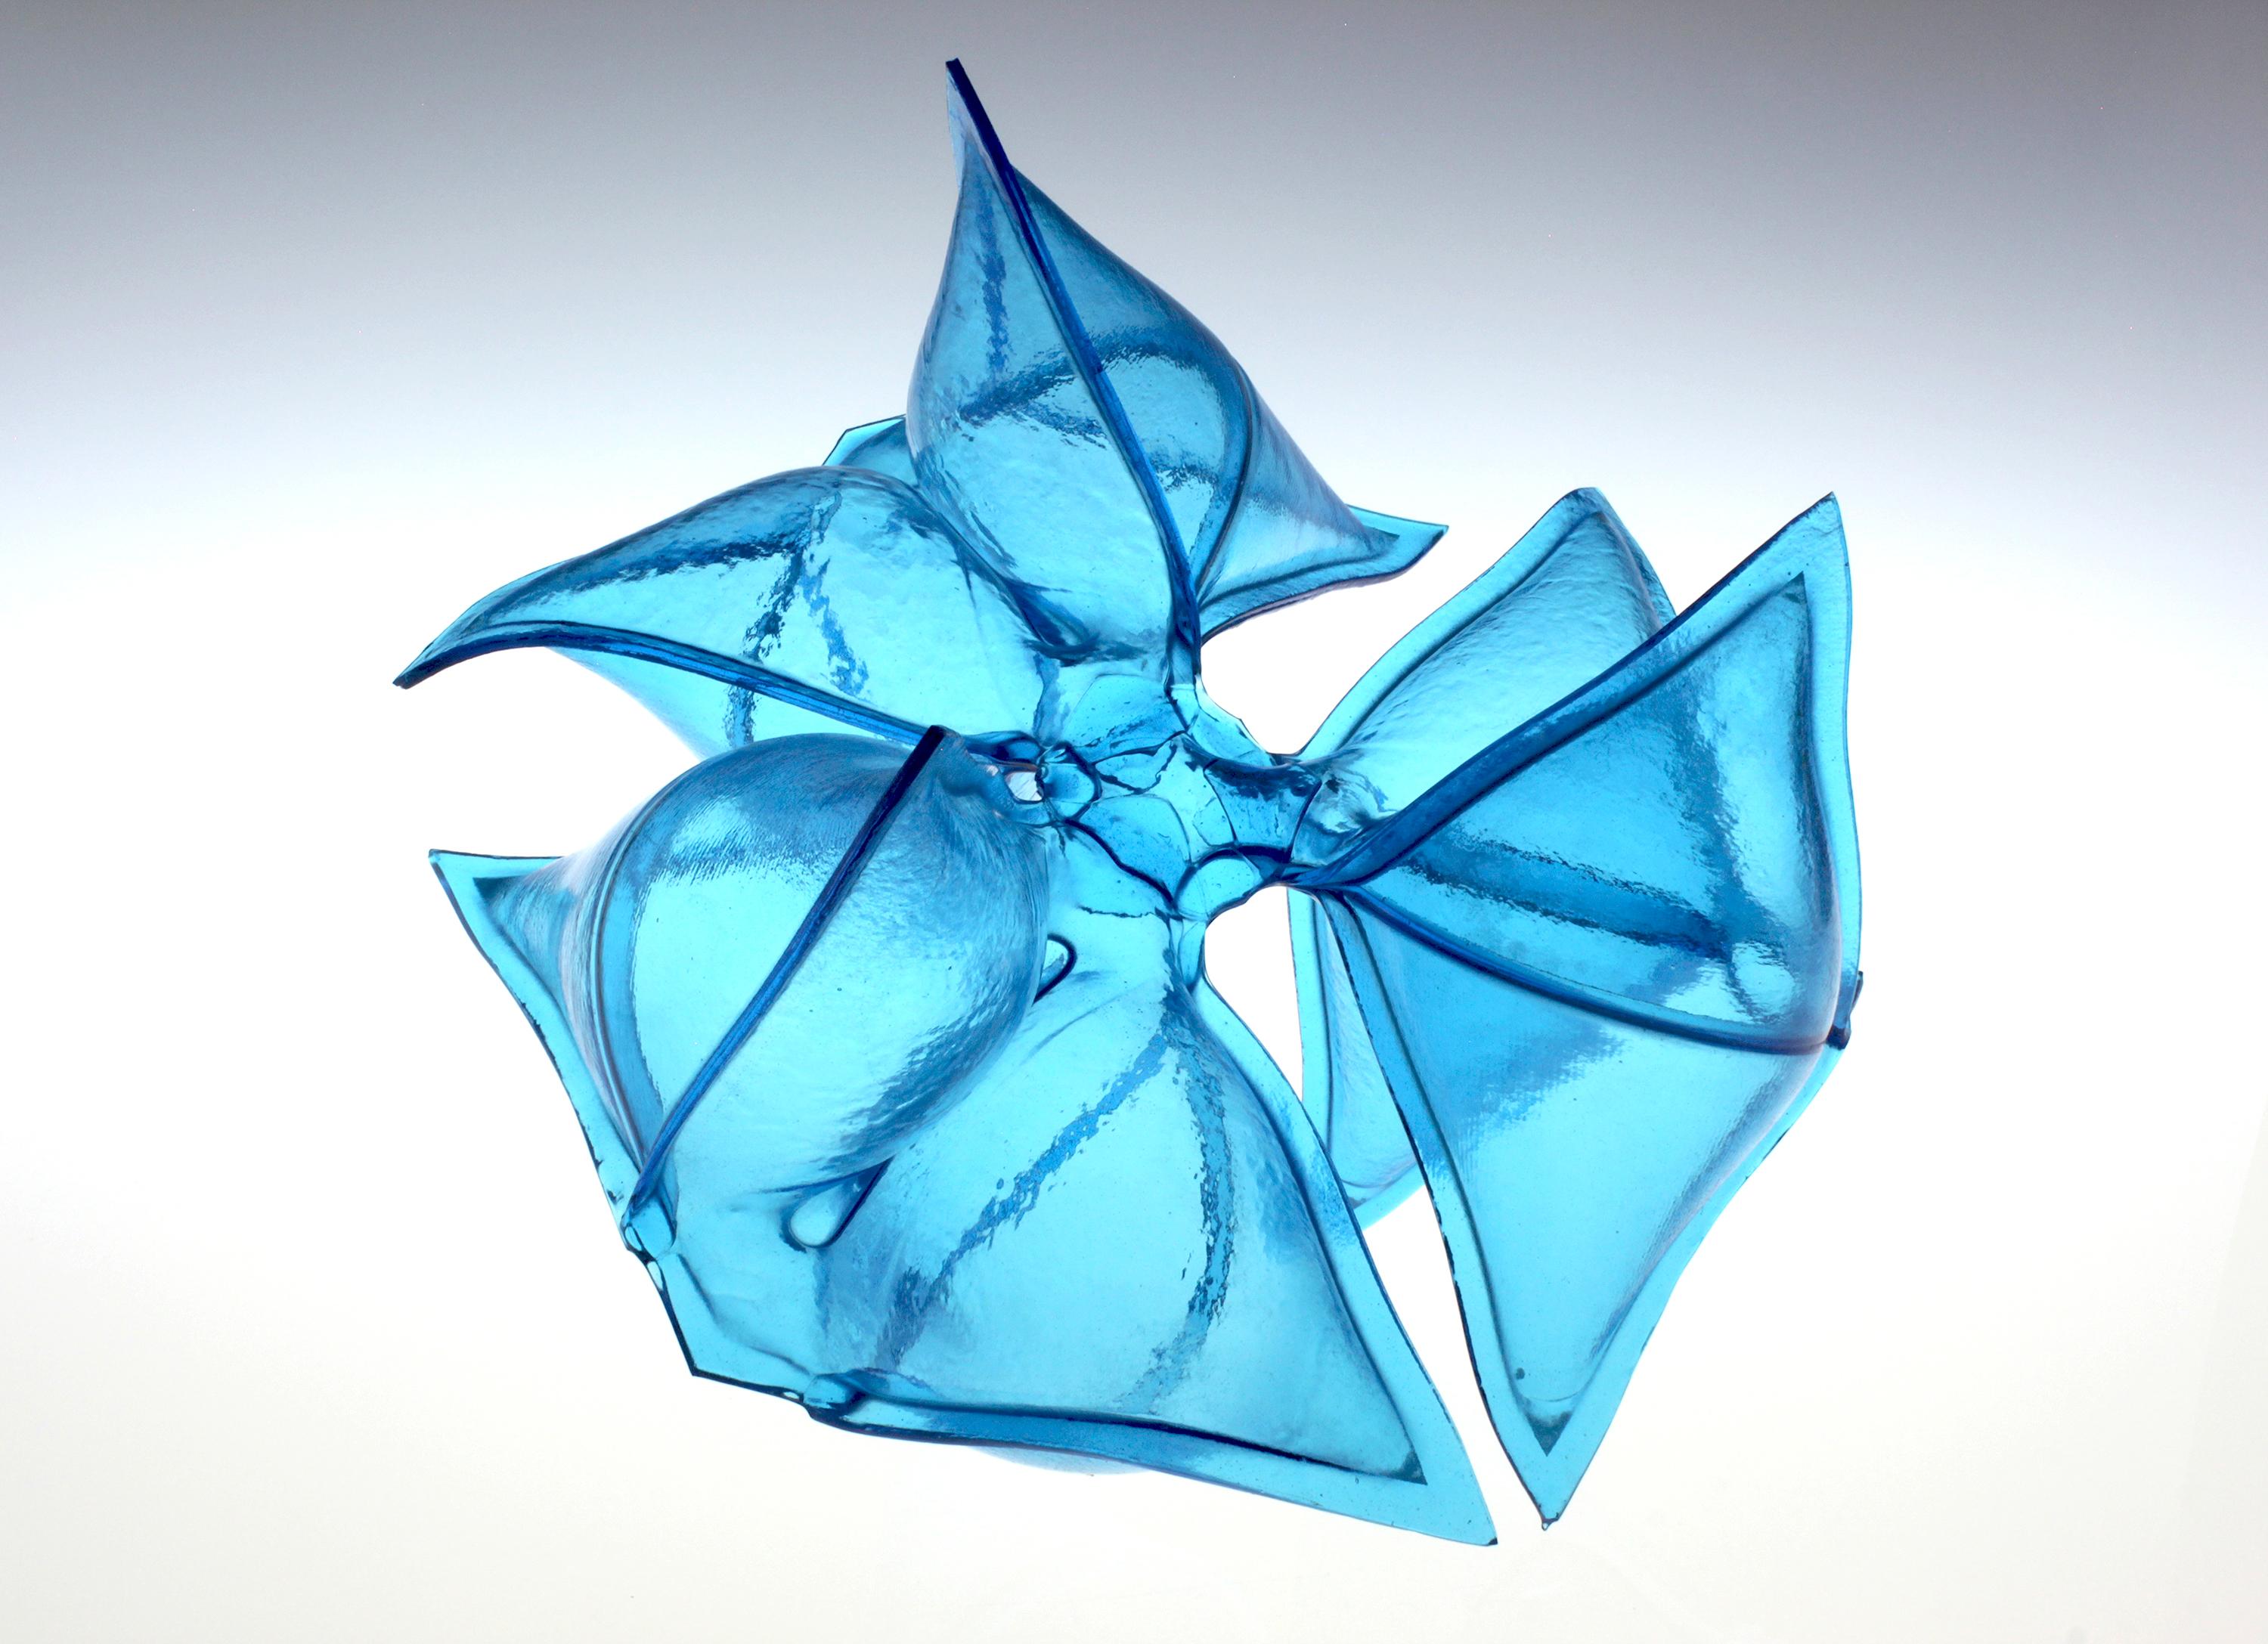 Matthew Szosz Abstract Sculpture - Untitled Inflatable #85b, Contemporary Glass Sculpture, Fused and Inflated Glass